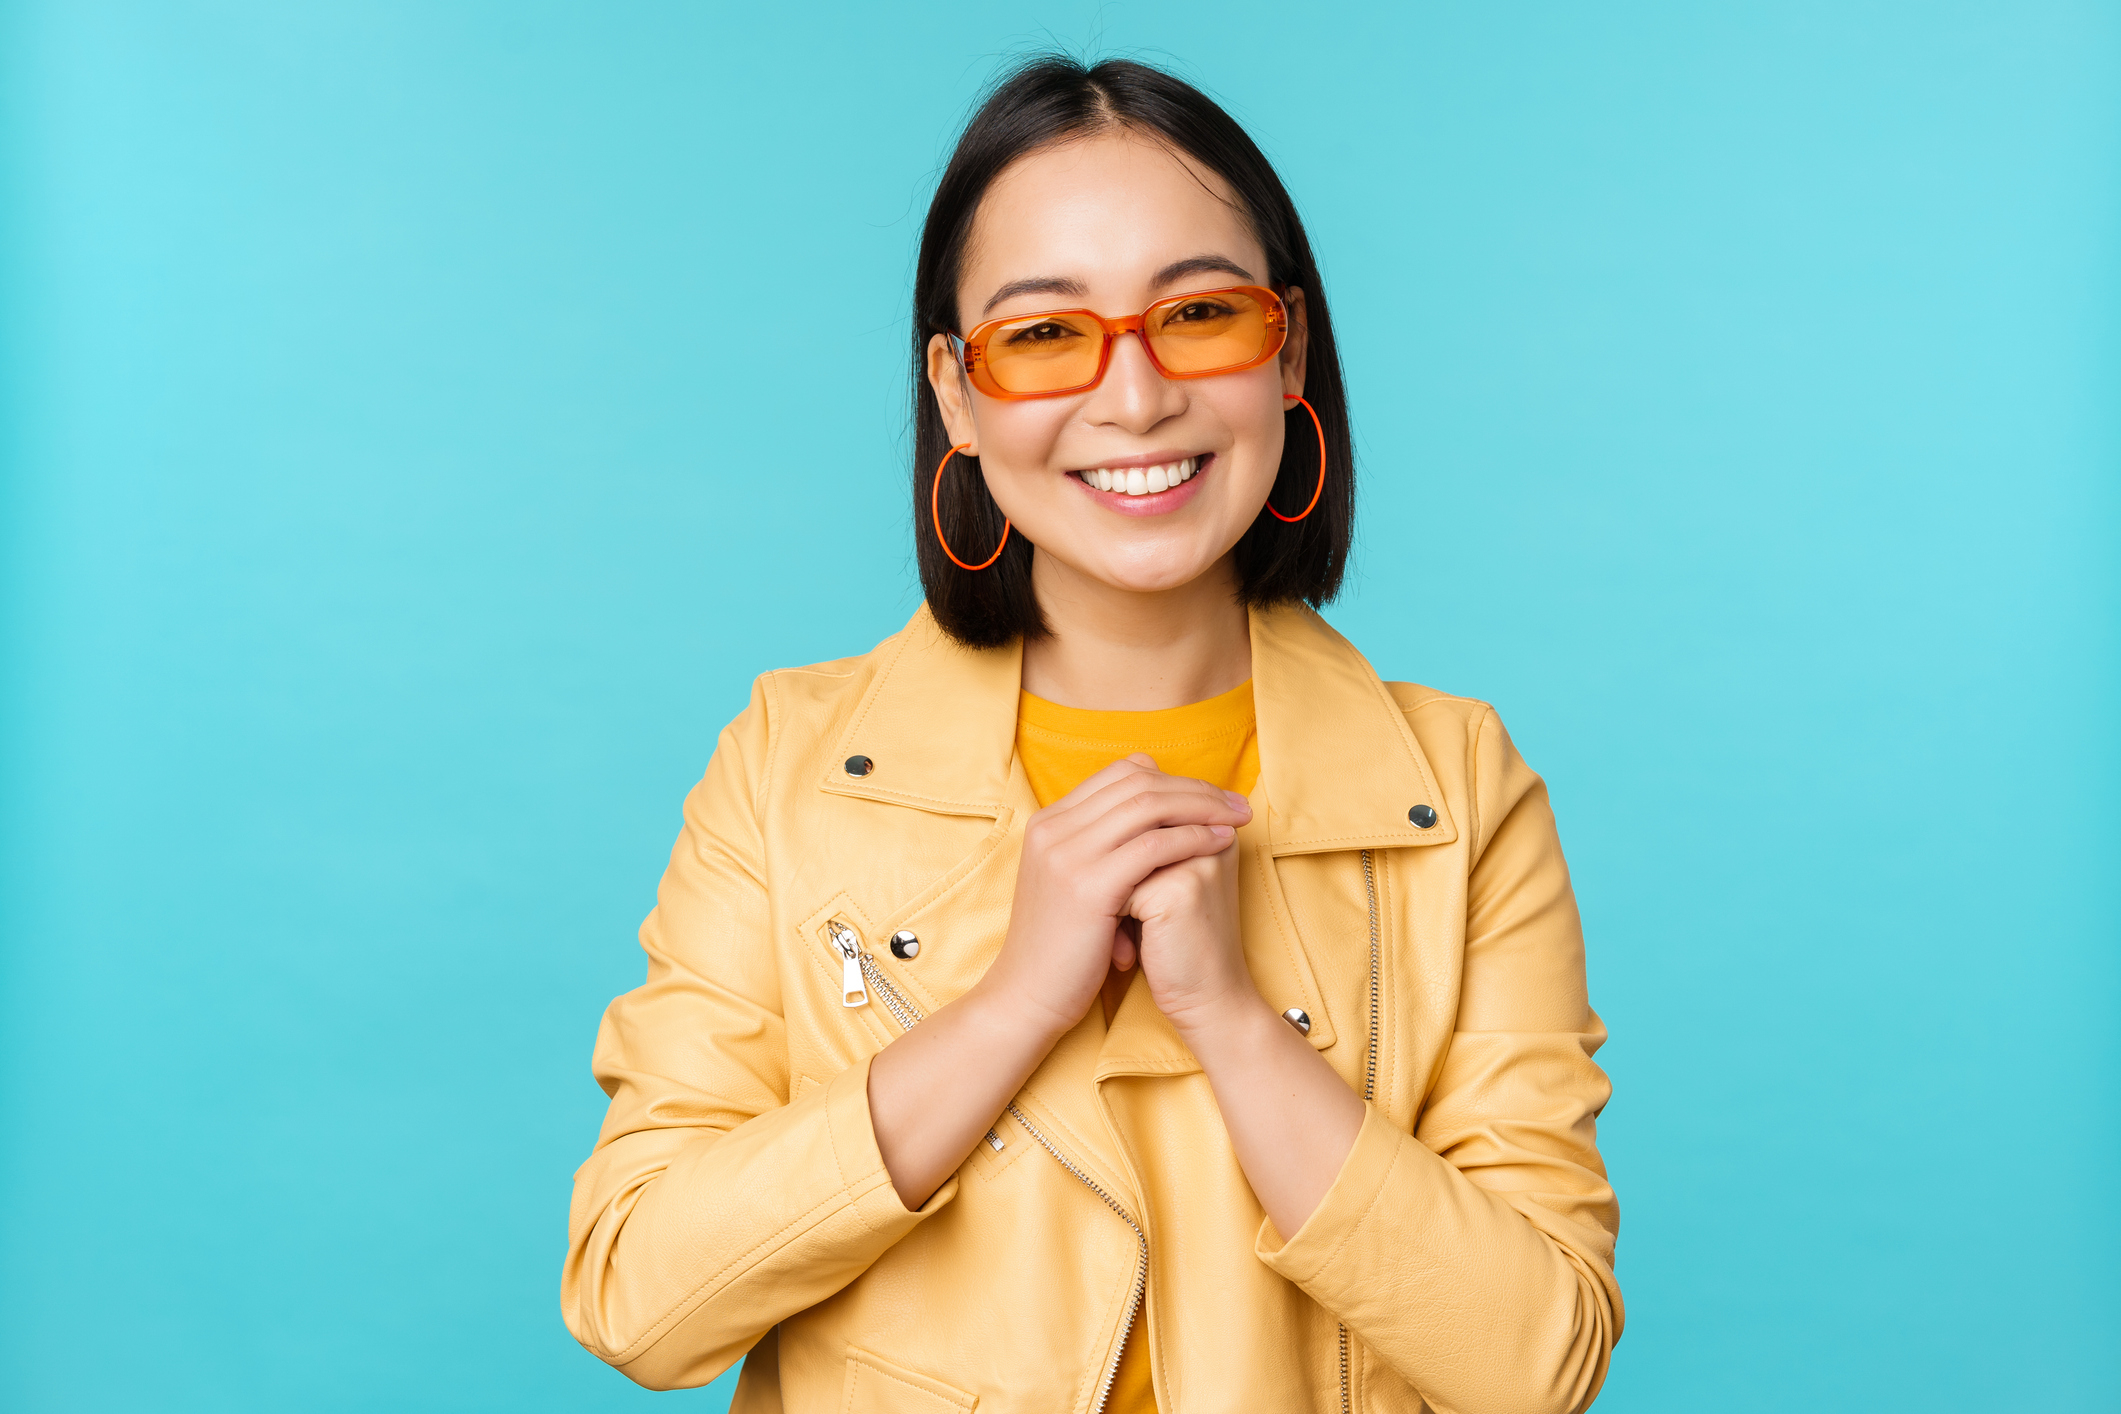 A smiling woman wearing a yellow jacket, orange-tinted glasses, and hoop earrings stands against a plain background, with hands clasped in front